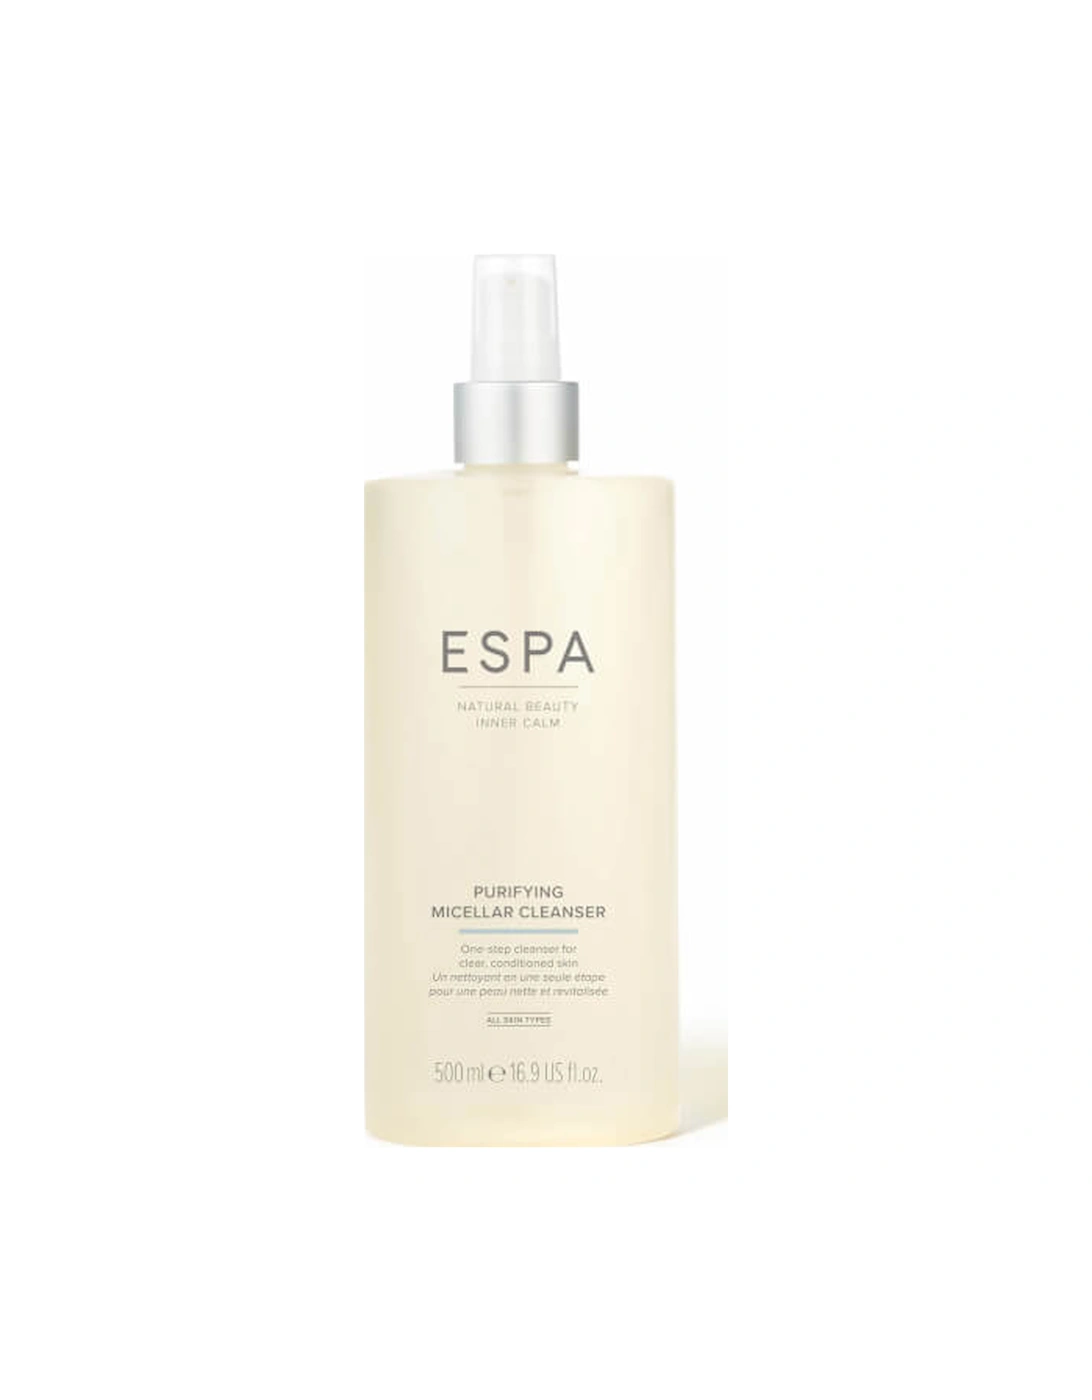 Purifying Micellar Cleanser Supersize 500ml - ESPA, 2 of 1